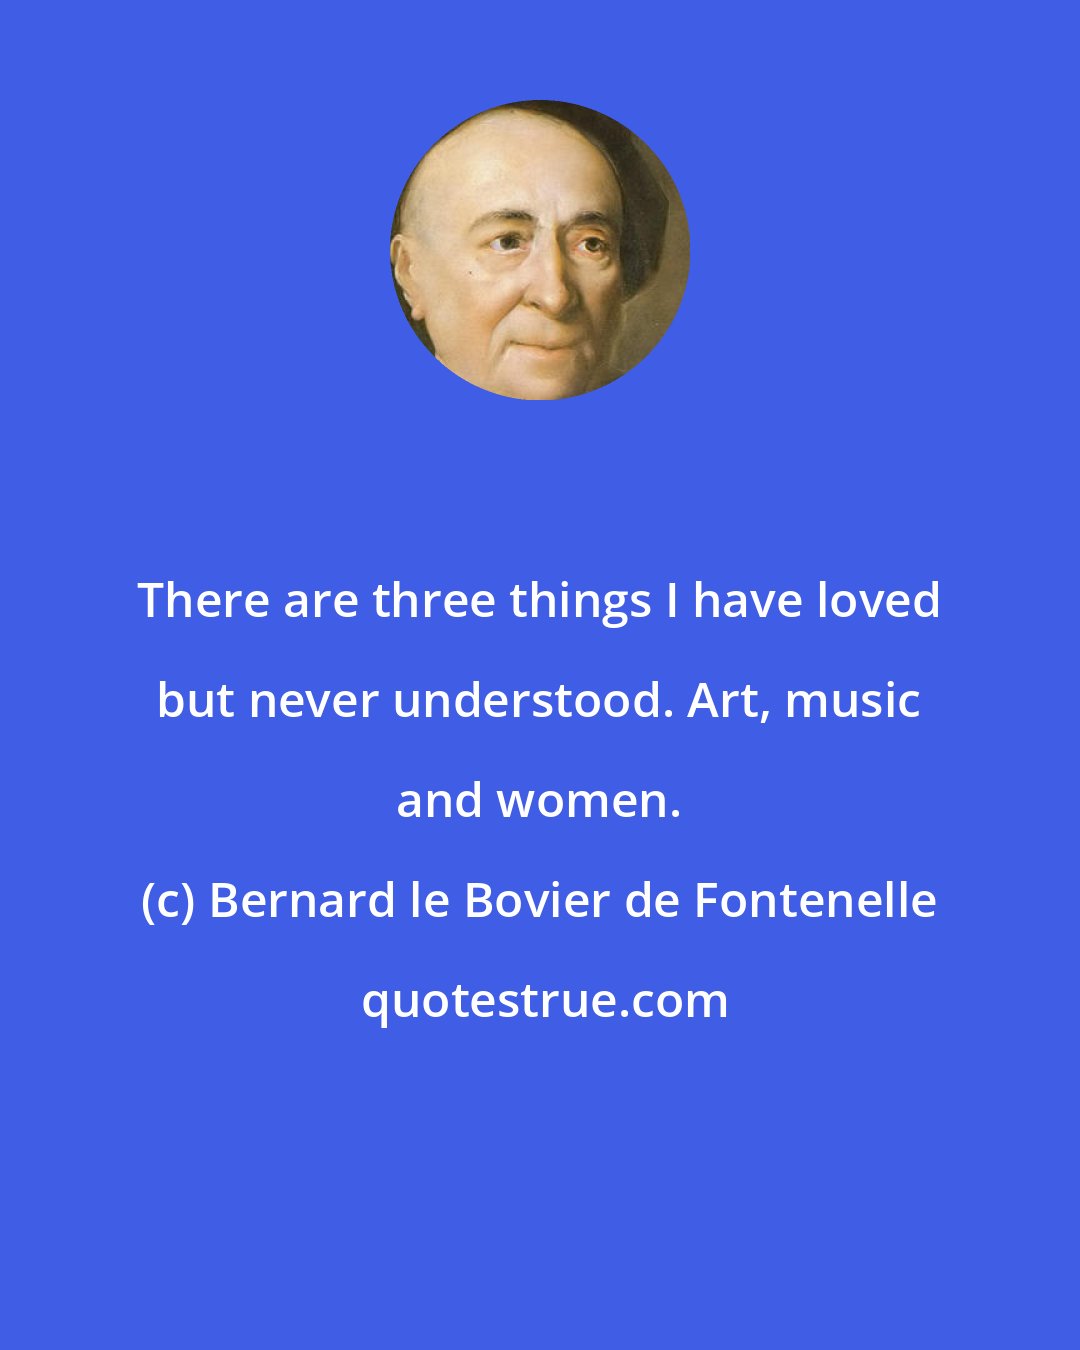 Bernard le Bovier de Fontenelle: There are three things I have loved but never understood. Art, music and women.